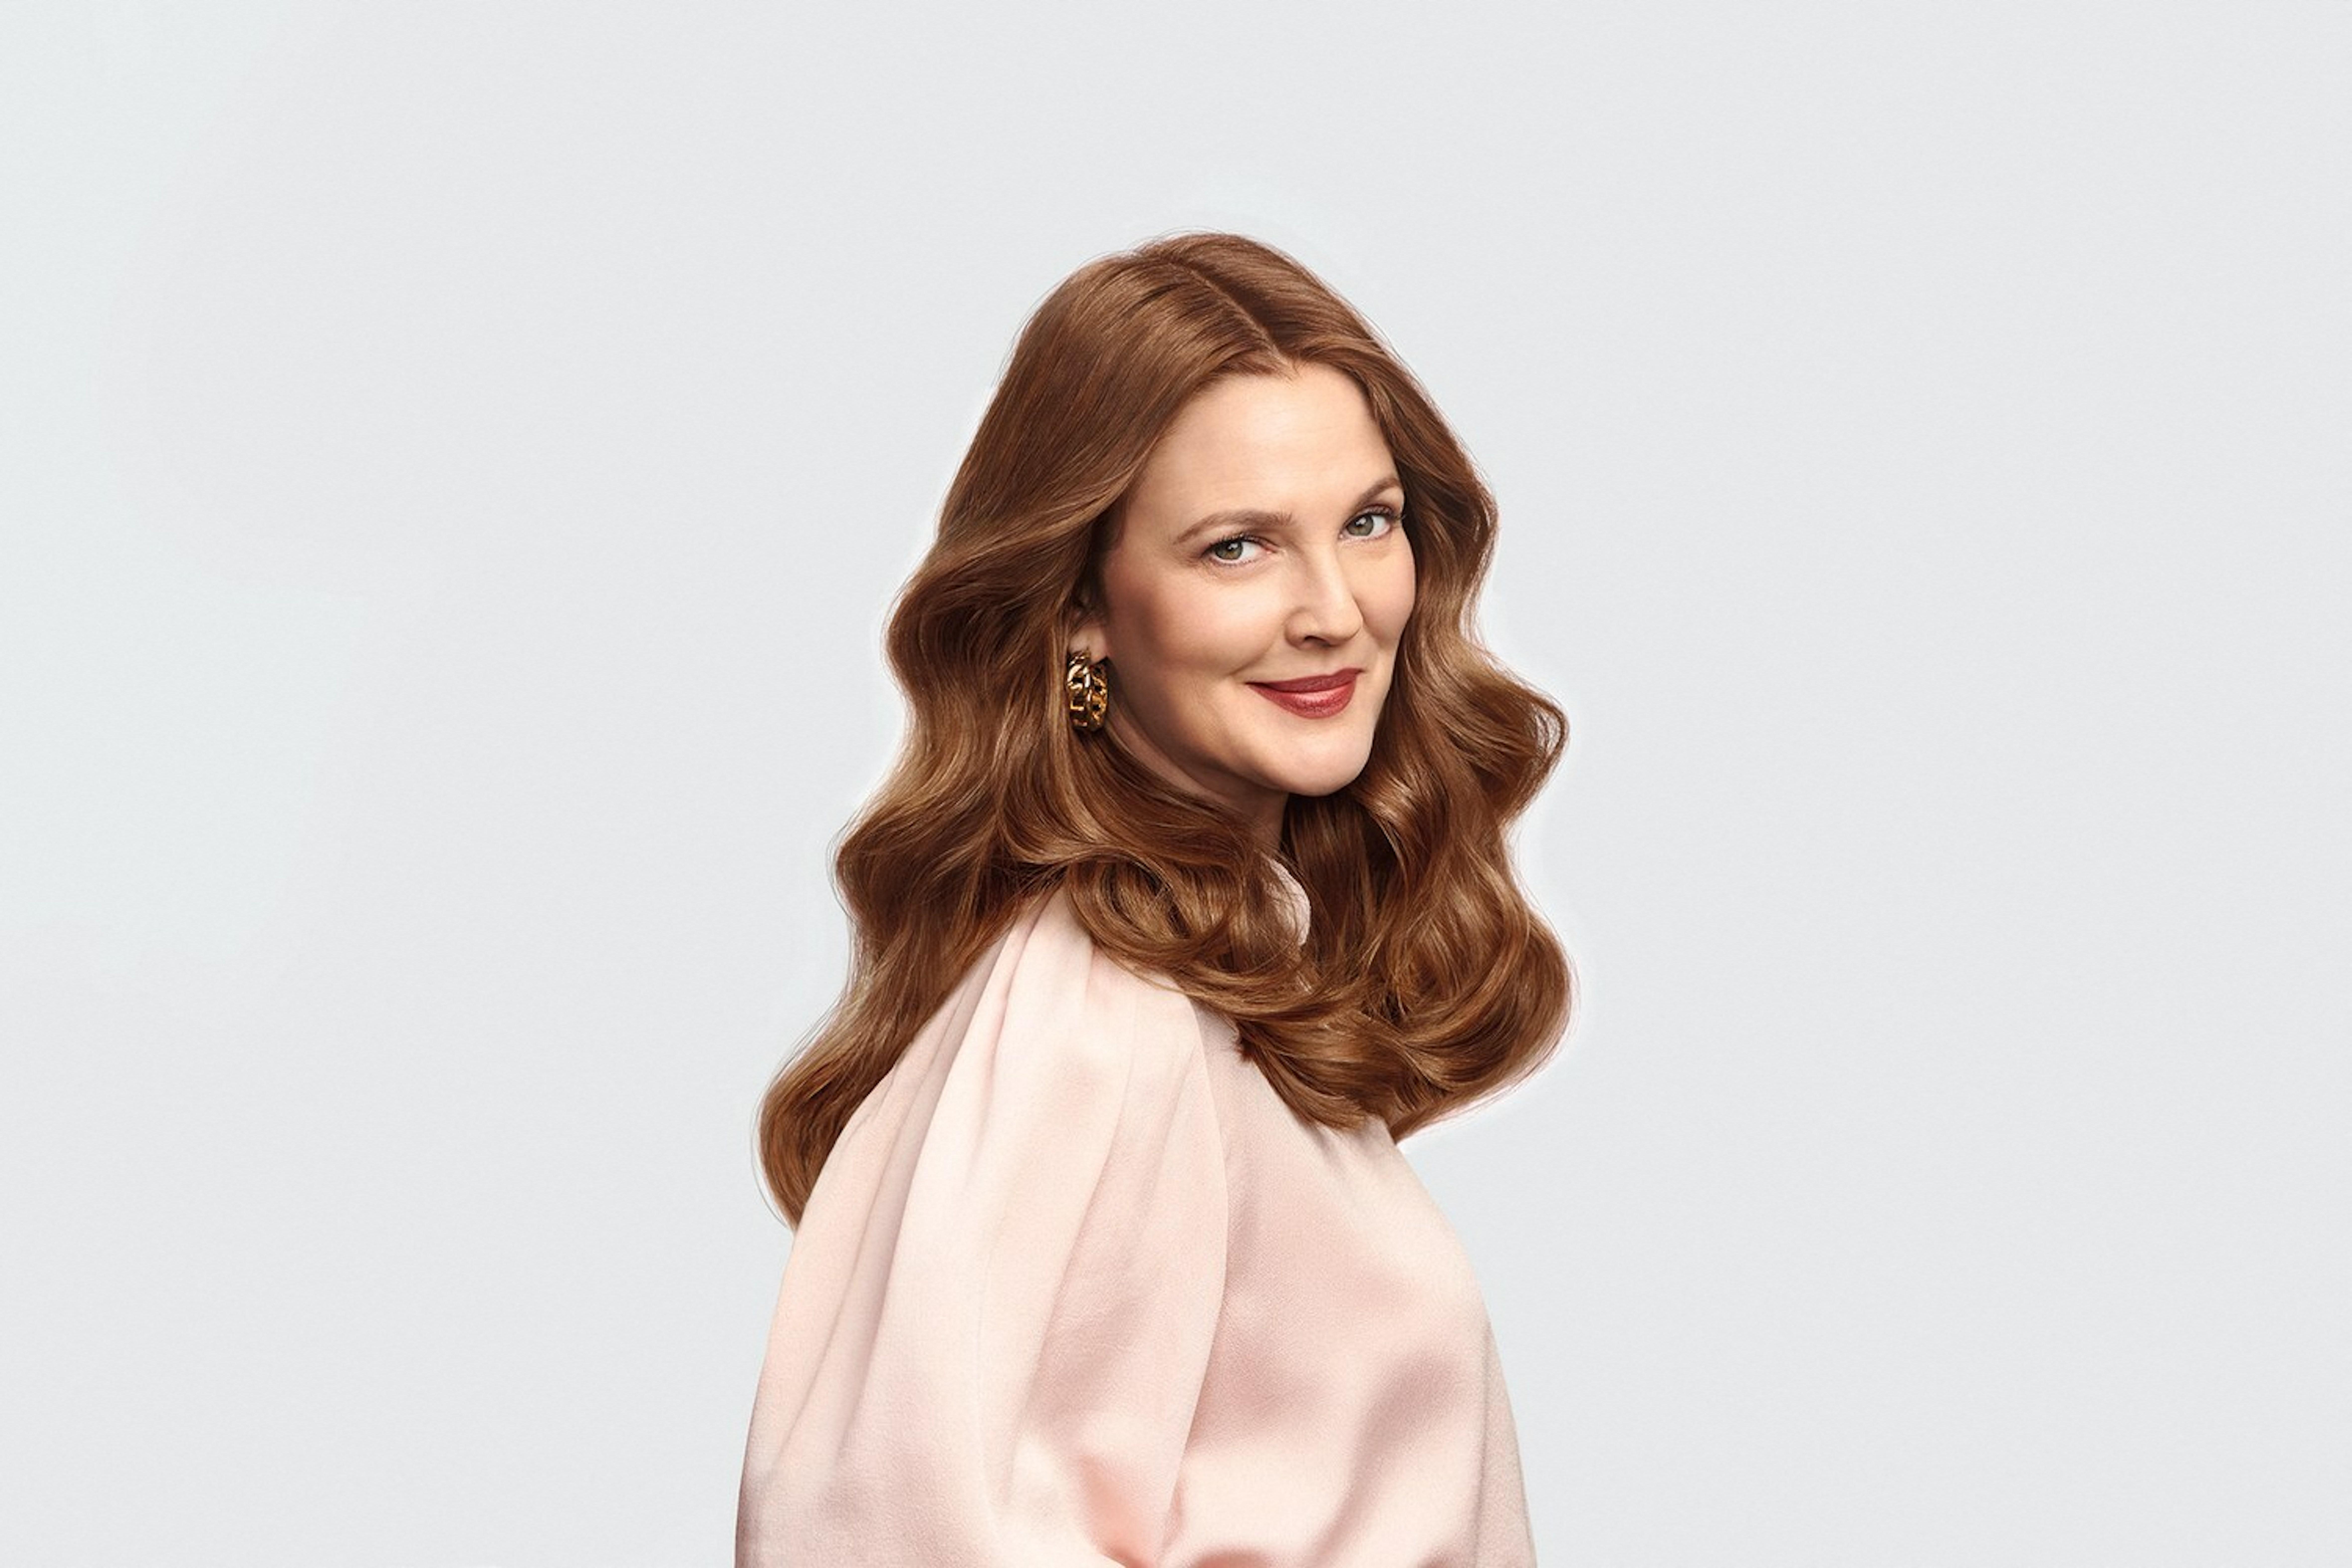 Drew Barrymore dyes her hair as new face of Garnier